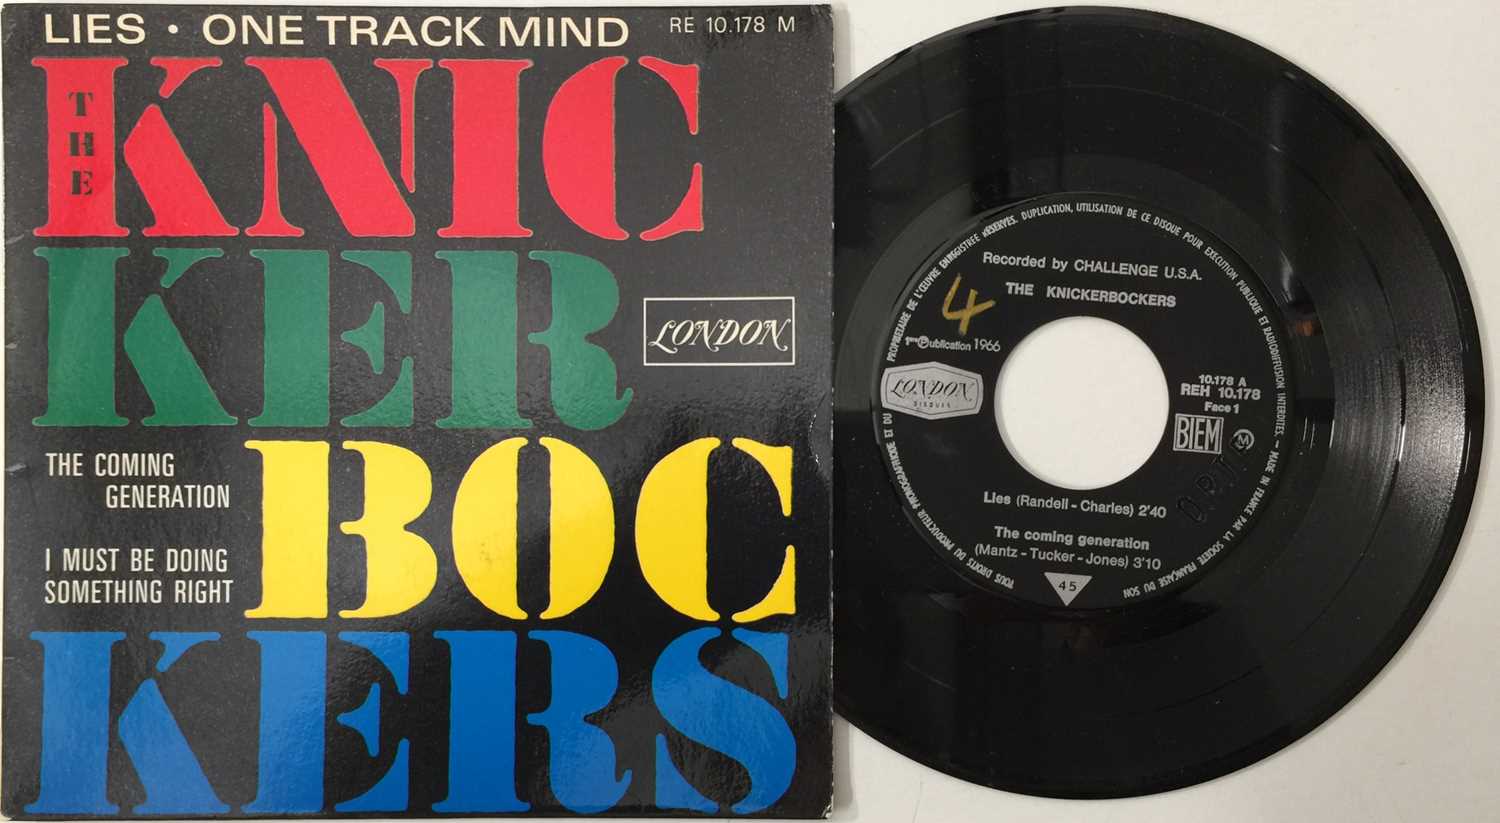 THE KNICKERBOCKERS - LIES/ONE TRACK MIND EP (ORIGINAL FRENCH RELEASE - LONDON REH 10.178)